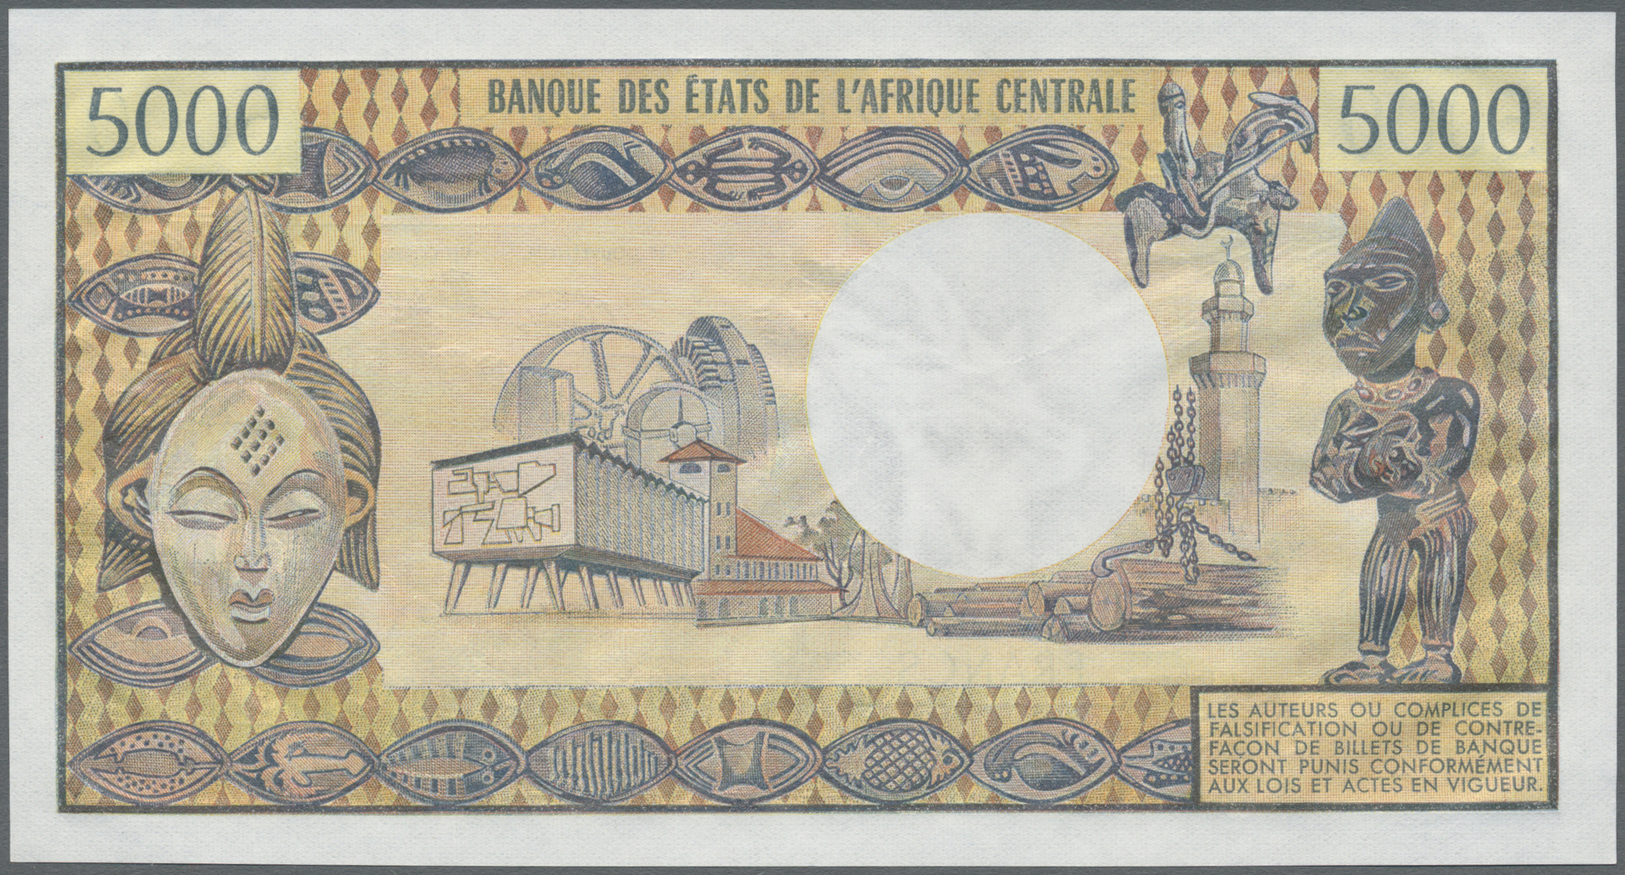 00583 Congo / Kongo: 5000 Francs ND P. 4c In Condition: UNC. - Unclassified